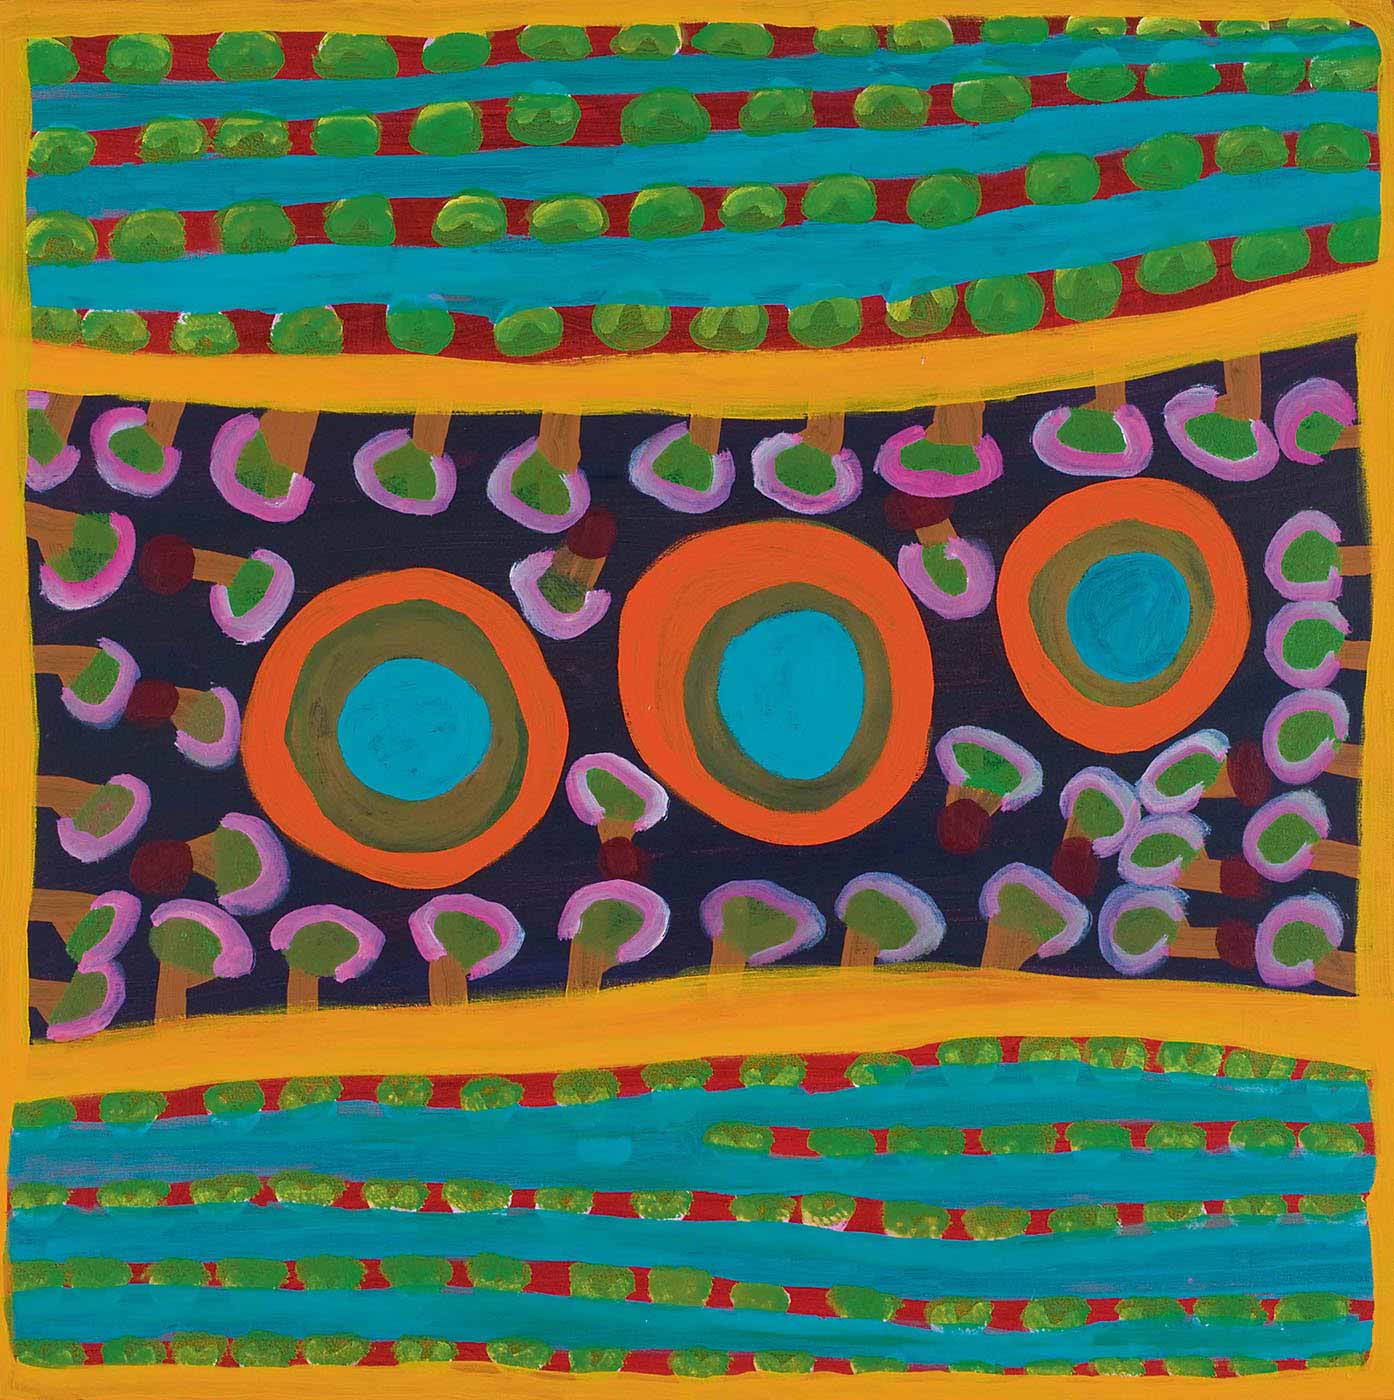 A square multicoloured painting on canvas divided into three horizontal segments, with three turquoise, green and orange concentric circles in a line across the centre, which rises slightly at the right side. These are surrounded by pink, brown and green tree-like motifs on a black background. Above and below this central section is a line of yellow then lines of turquoise separated by green discs on red stripes. - click to view larger image